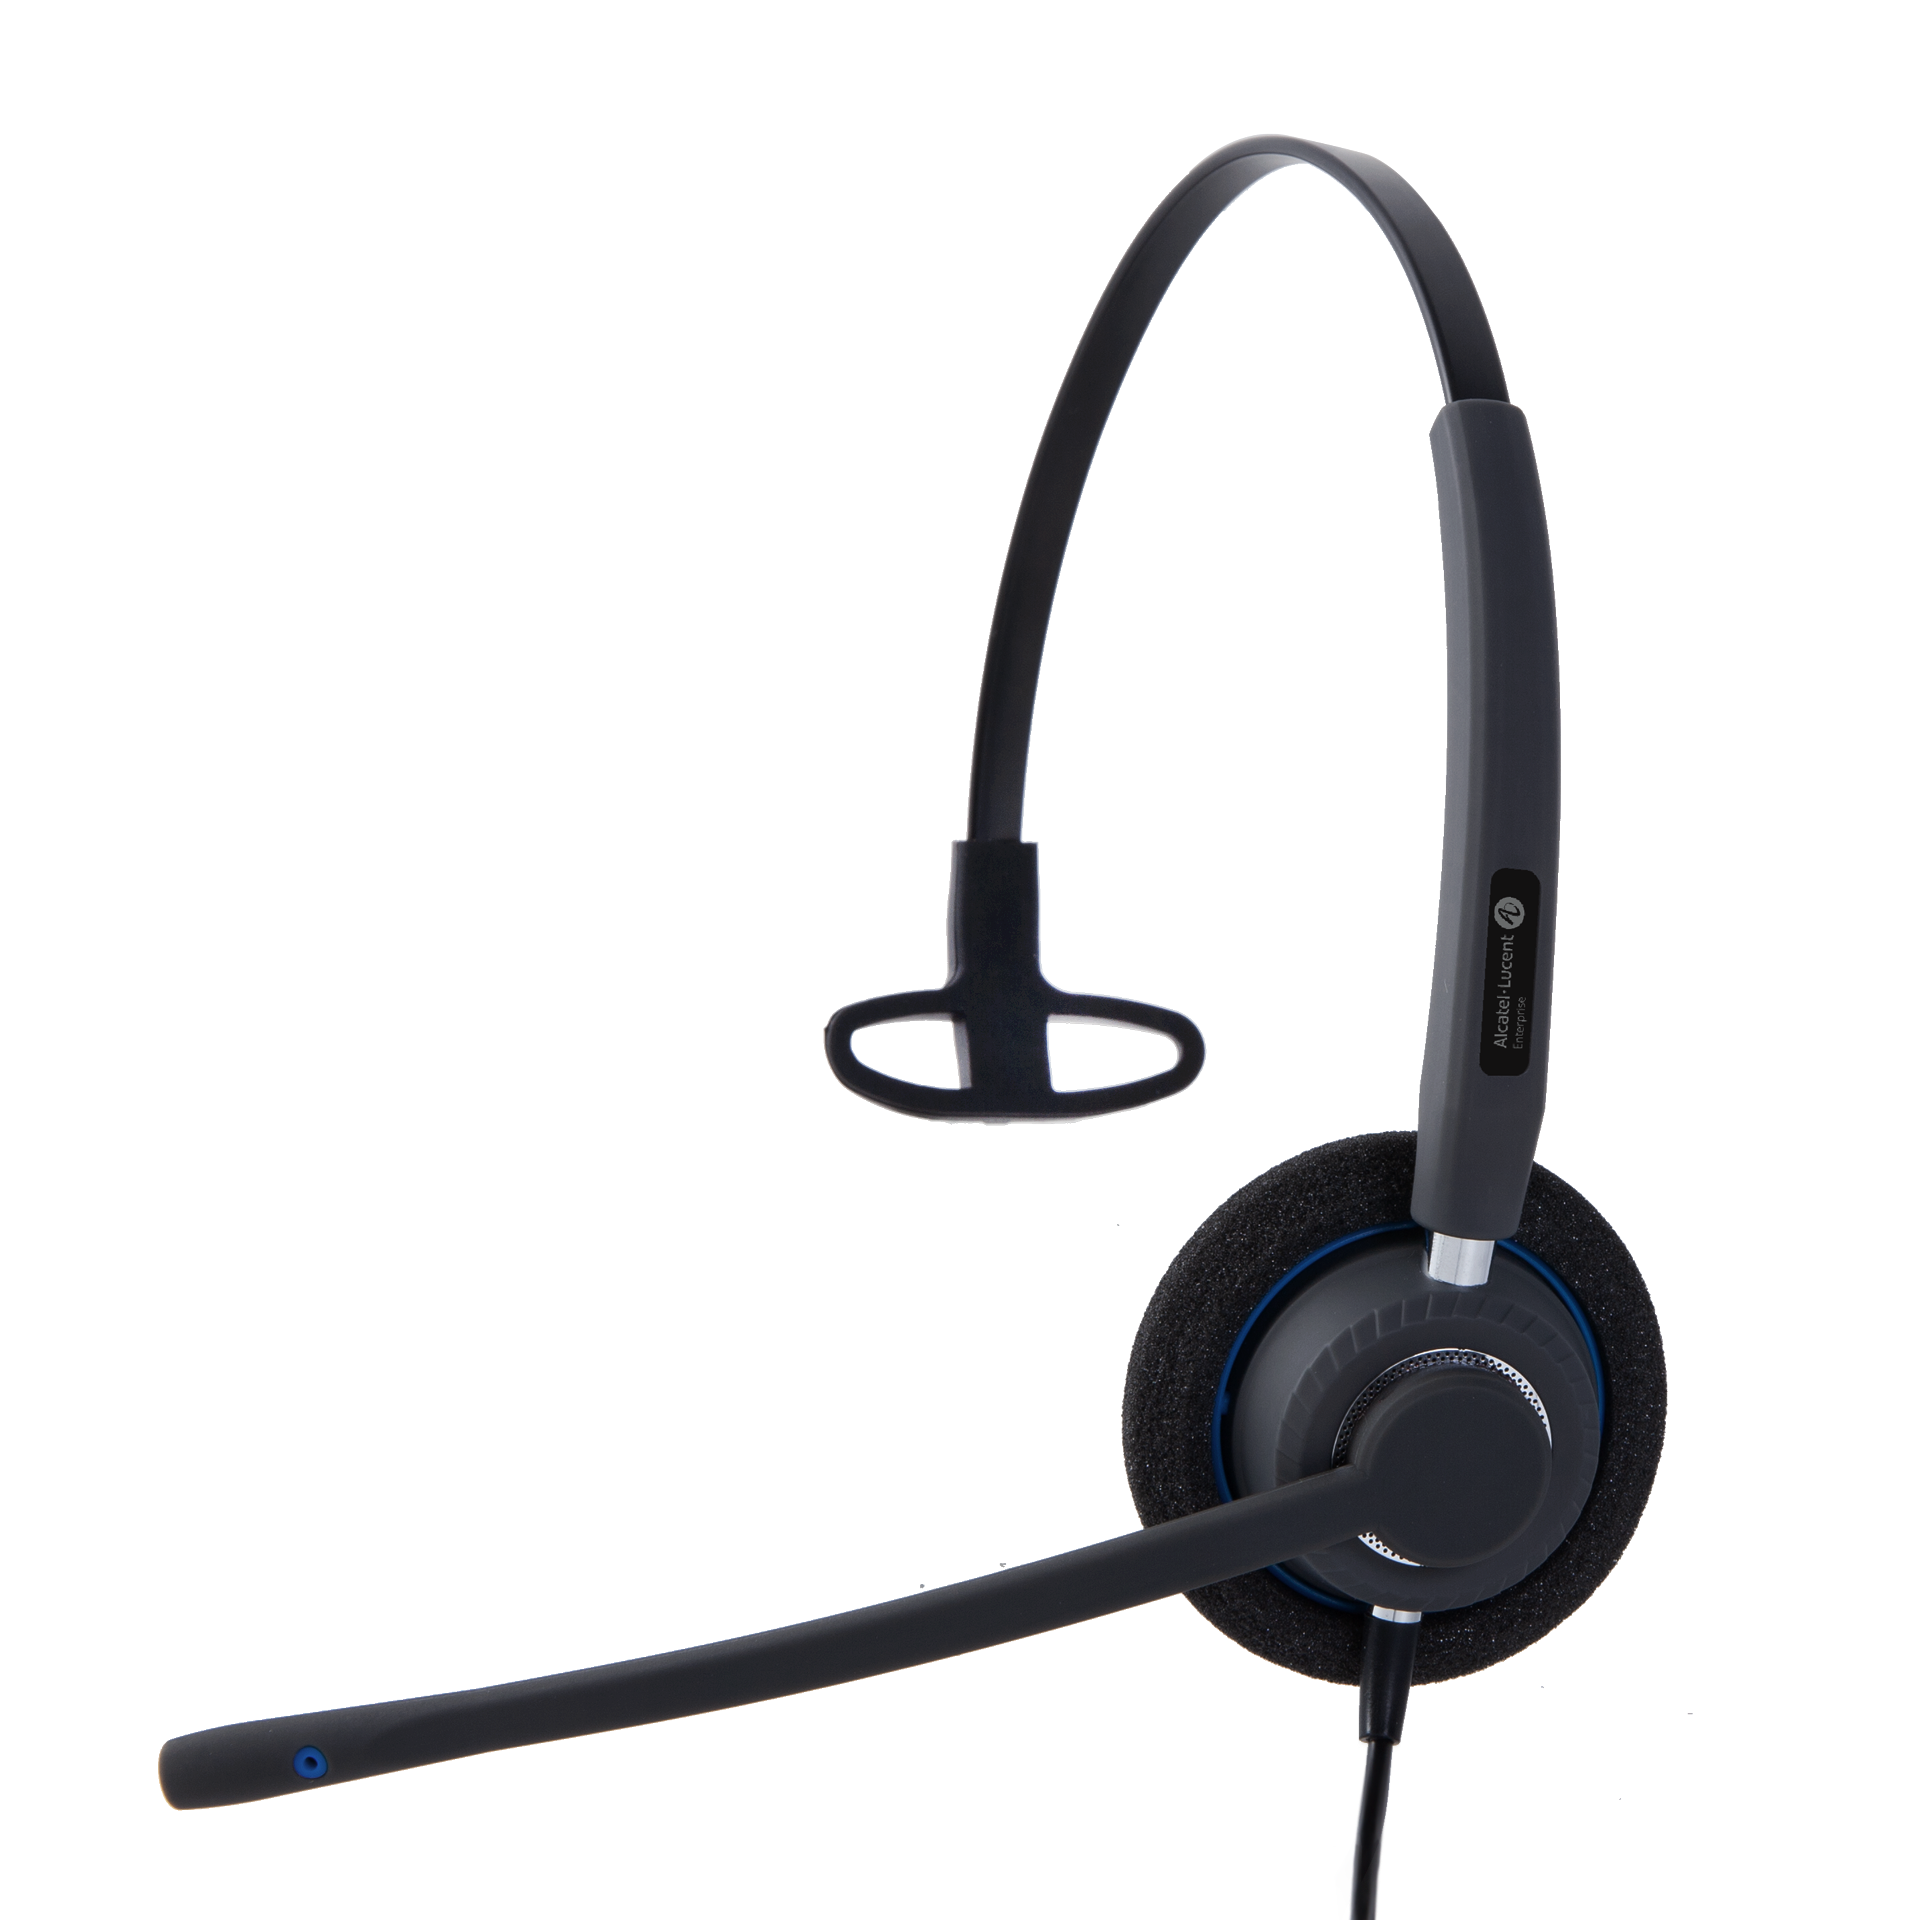 Refined High-definition Speakers 3.5mm Jack, USB A, USB C Interfaces Flexible Connections AH 22 M II PREMIUM HEADSET